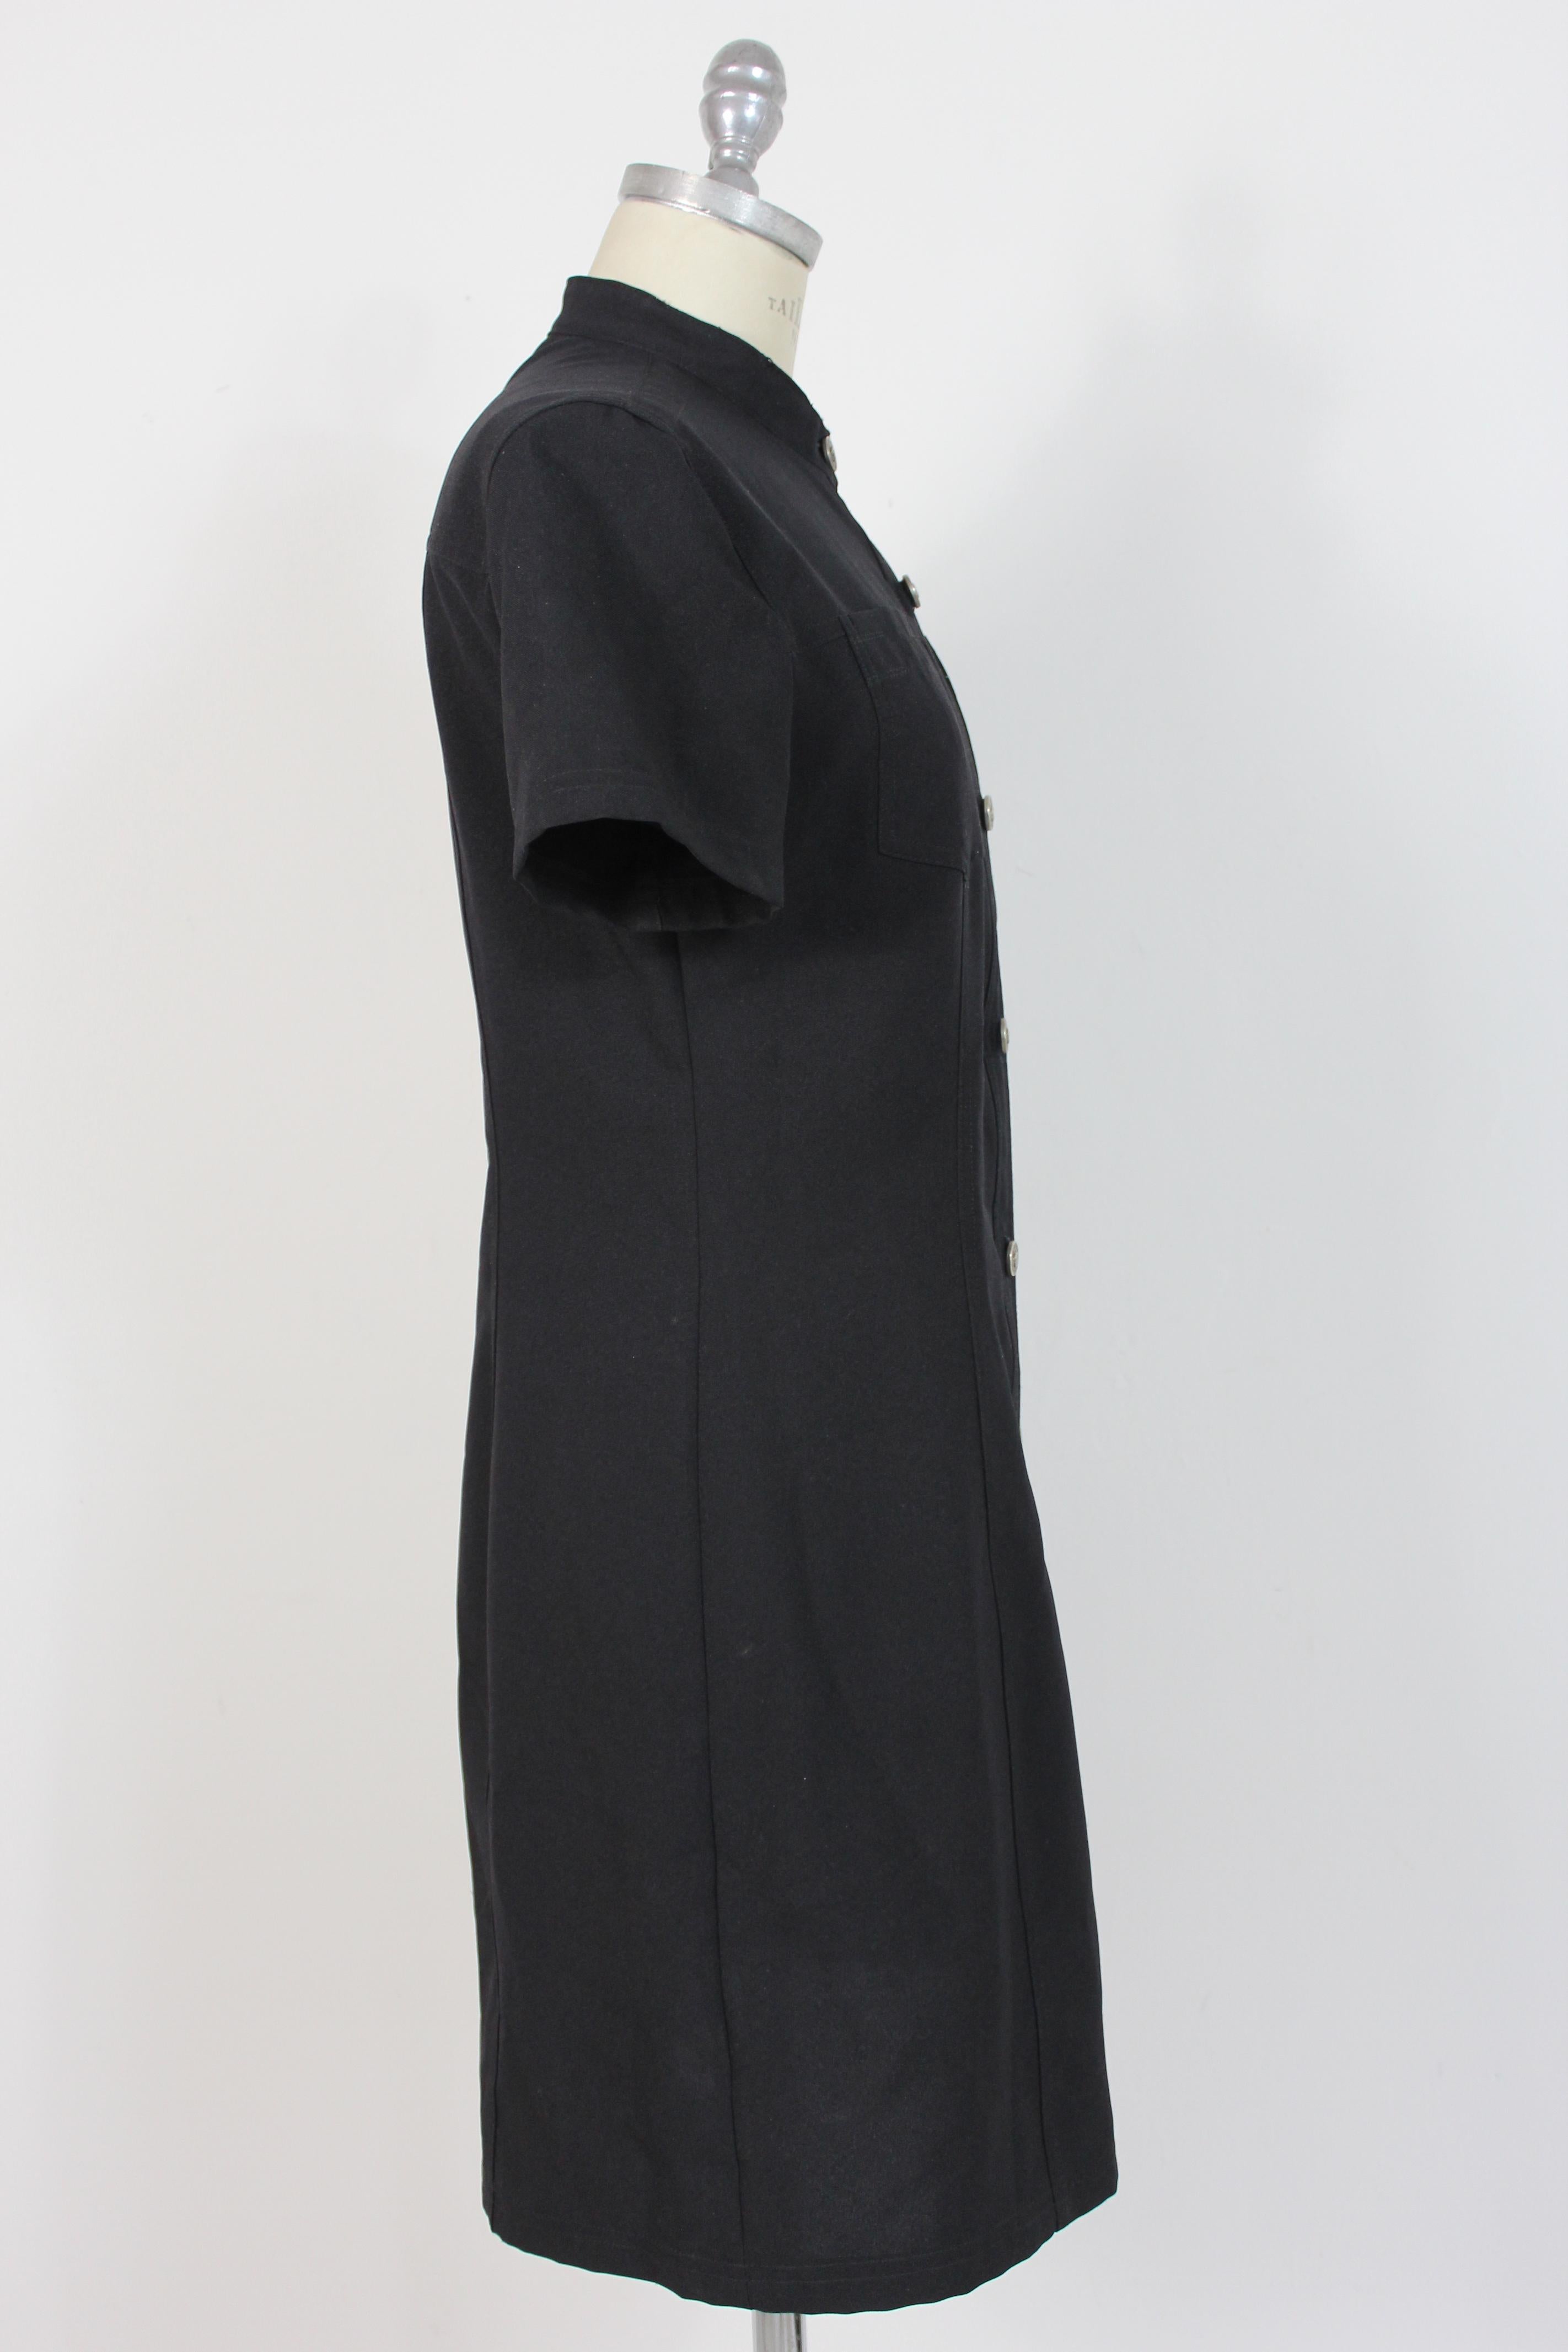 Versace Jeans Couture Black Short Casual Sheath Dress In Excellent Condition In Brindisi, Bt